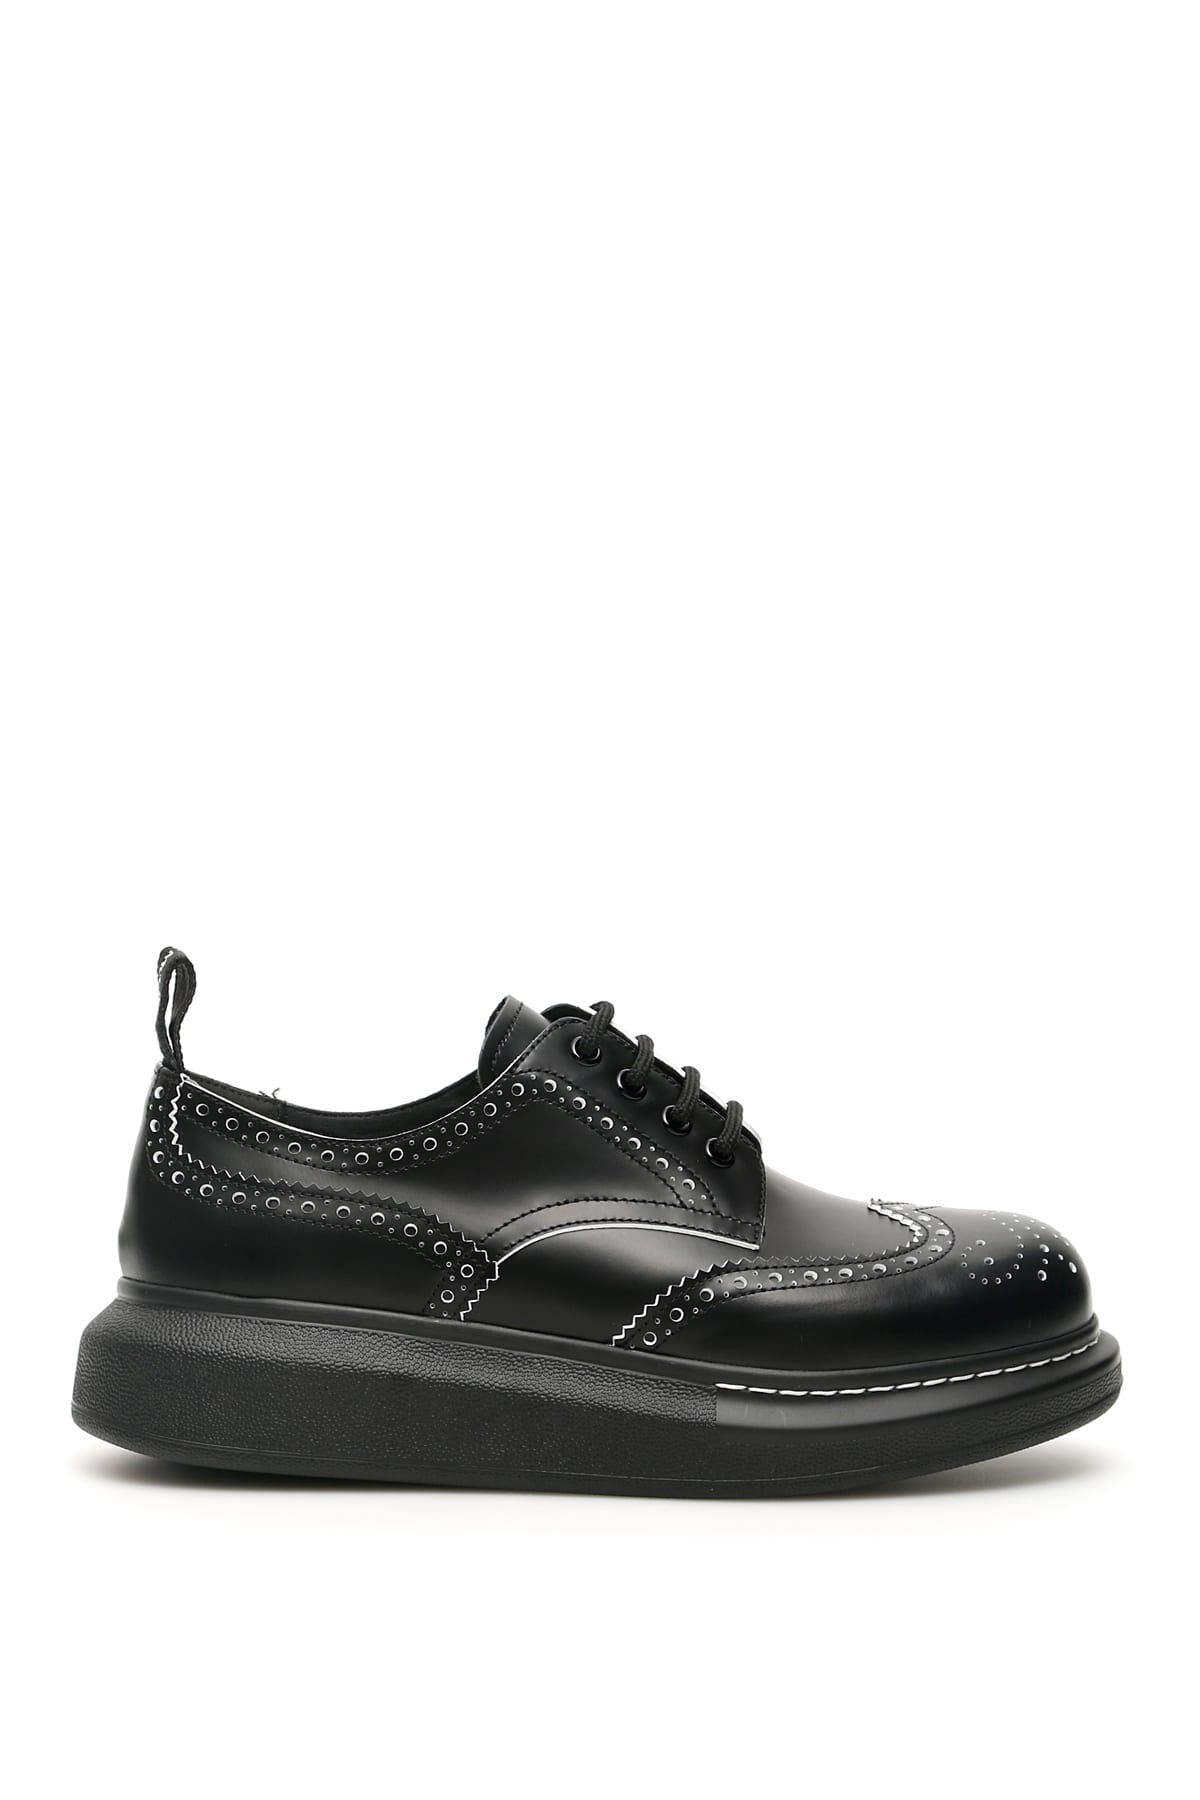 Buy Alexander McQueen Hybrid Lace-ups online, shop Alexander McQueen shoes with free shipping